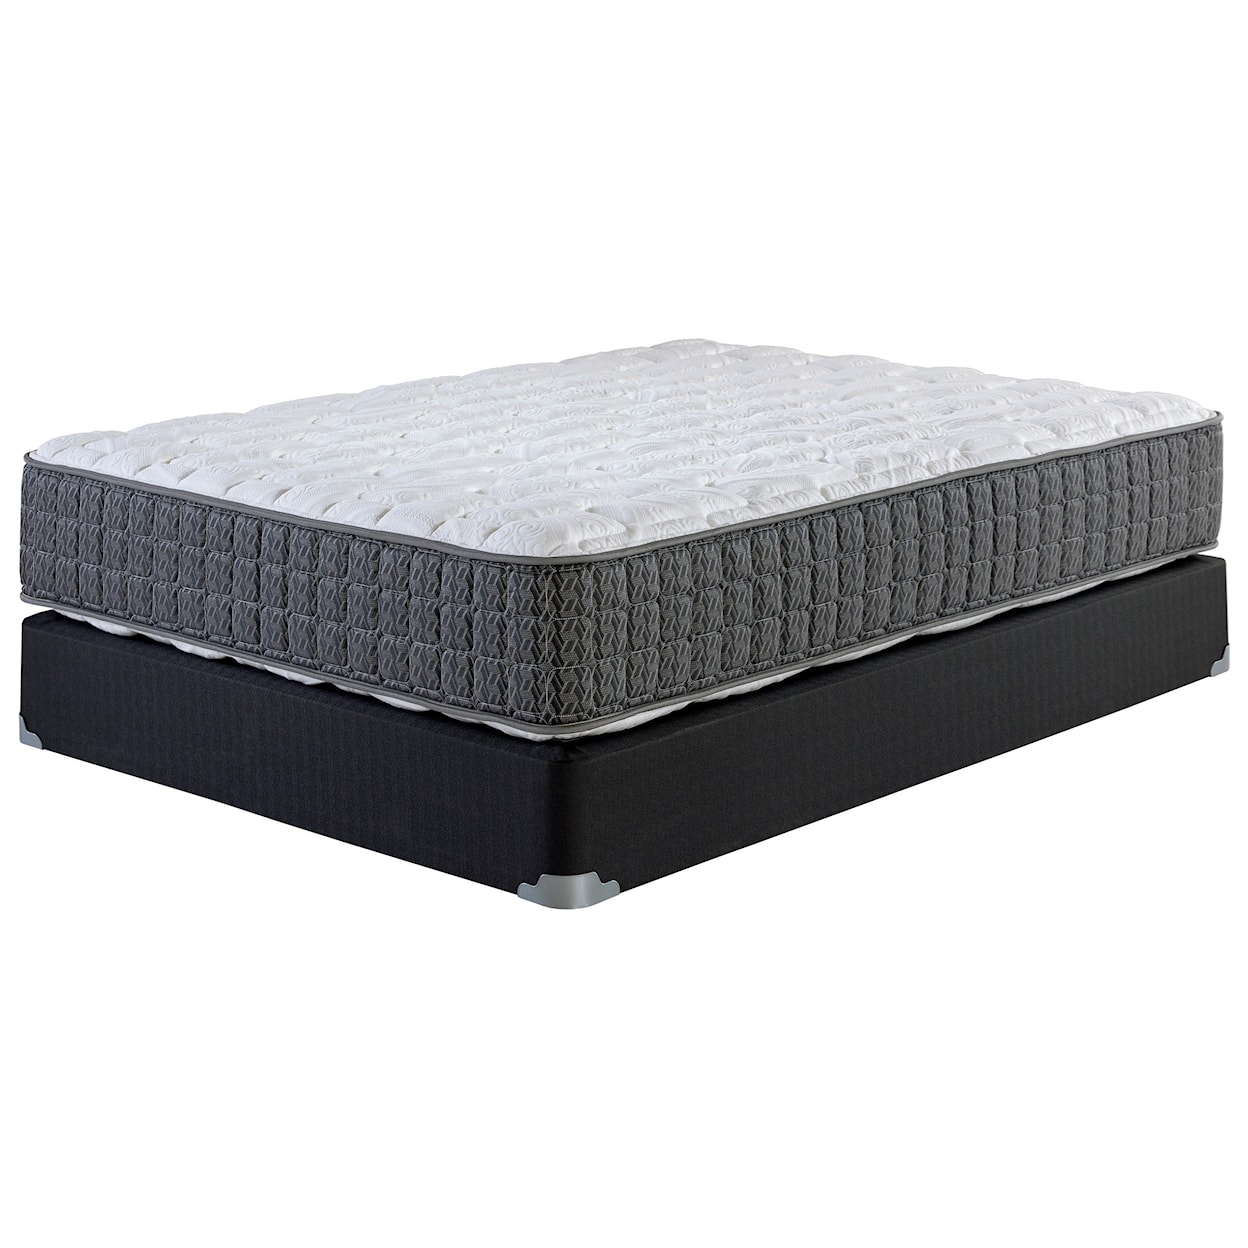 Corsicana Rossington Firm King Firm Two Sided Mattress Set